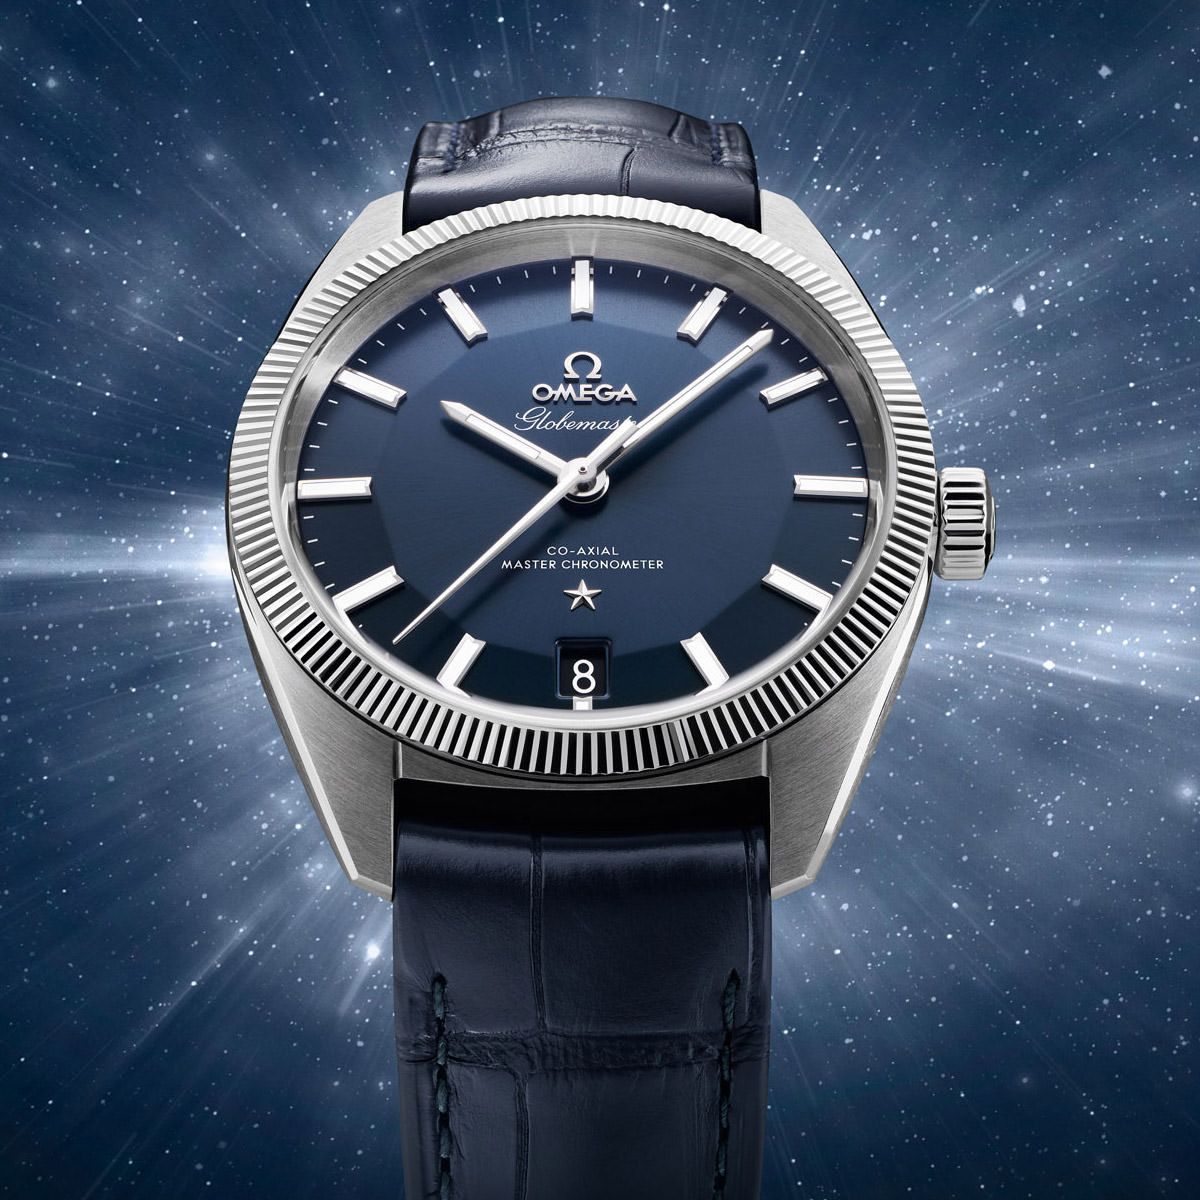 The Top 10 Omega Watches in India—The 